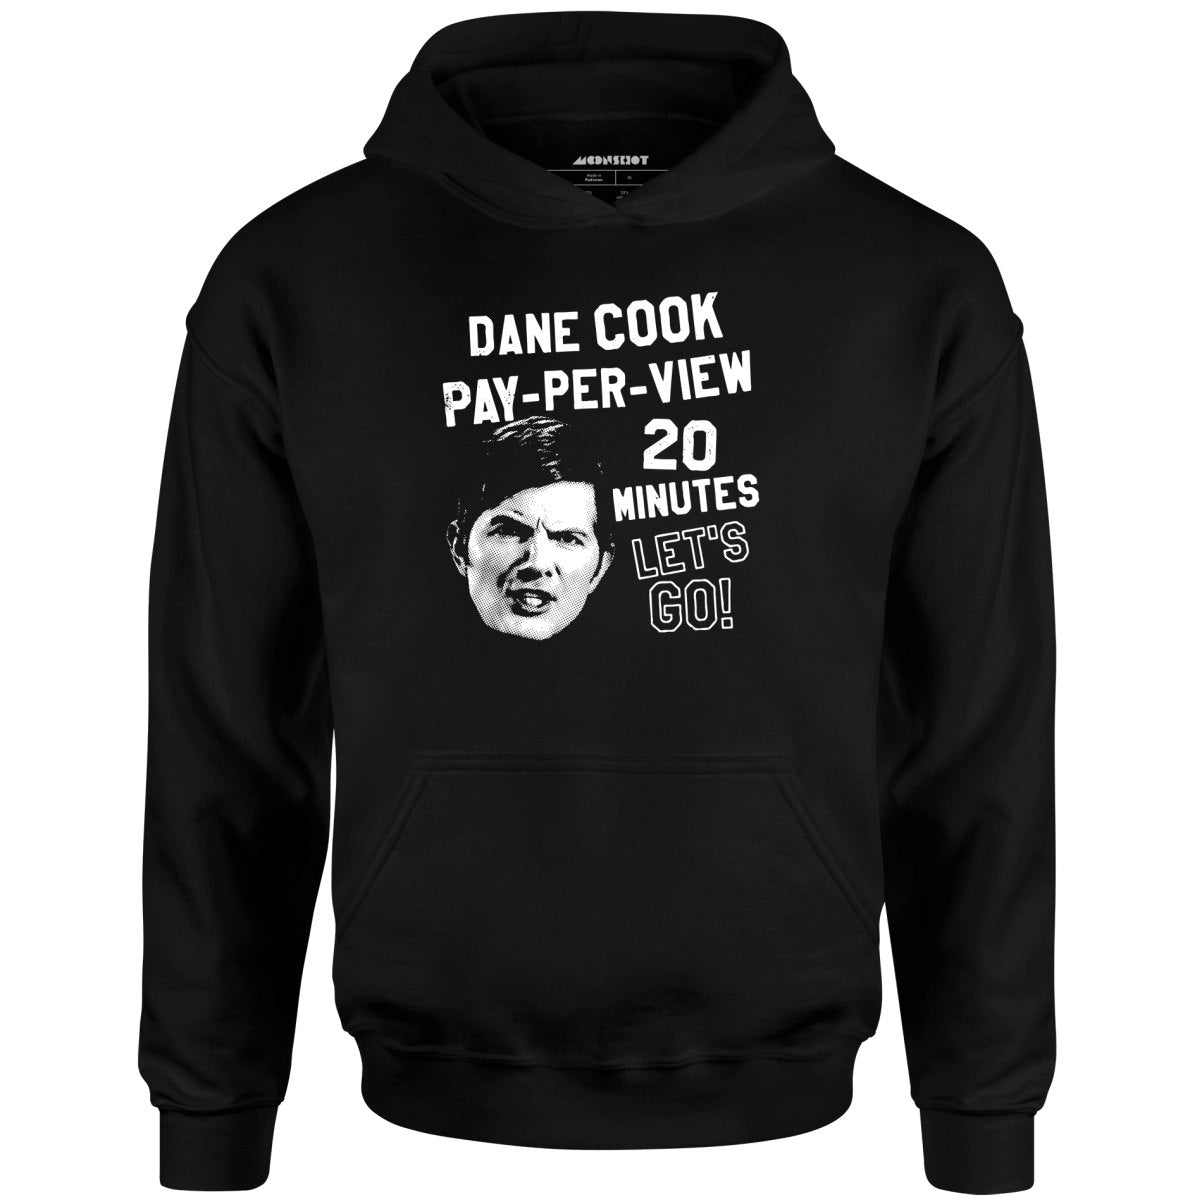 Dane Cook Pay-Per-View 20 Minutes Let's Go - Unisex Hoodie